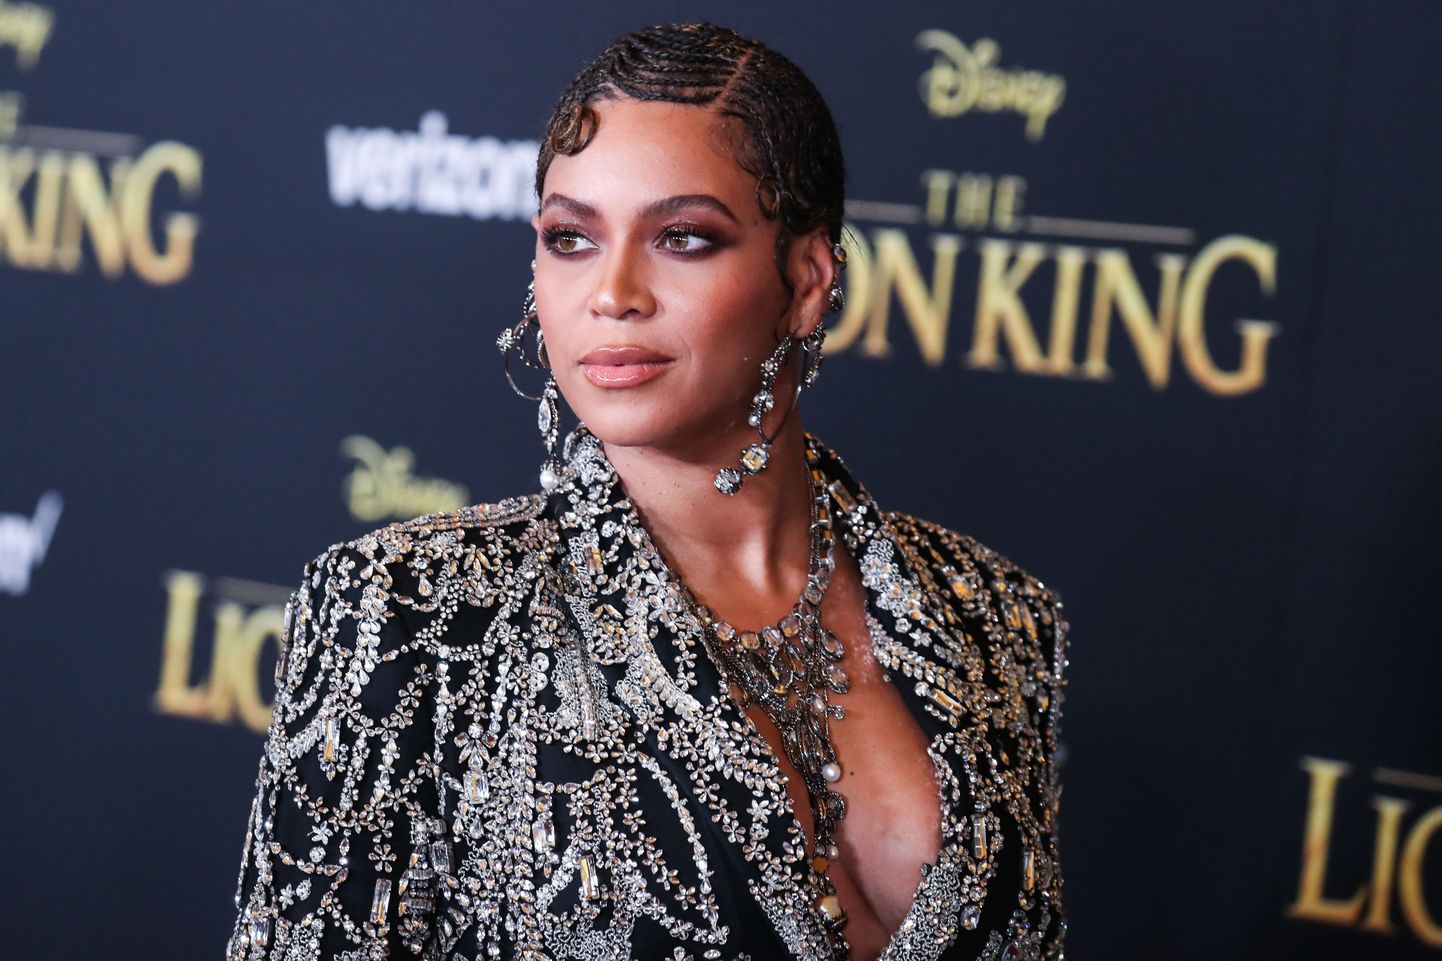 HOLLYWOOD, LOS ANGELES, CALIFORNIA, USA - JULY 09: Singer Beyonce Knowles Carter wearing an outfit by Alexander McQueen and Lorraine Schwartz jewelry arrives at the World Premiere Of Disney's 'The Lion King' held at the Dolby Theatre on July 9, 2019 in Hollywood, Los Angeles, California, United States. (Photo by Xavier Collin/Image Press Agency)